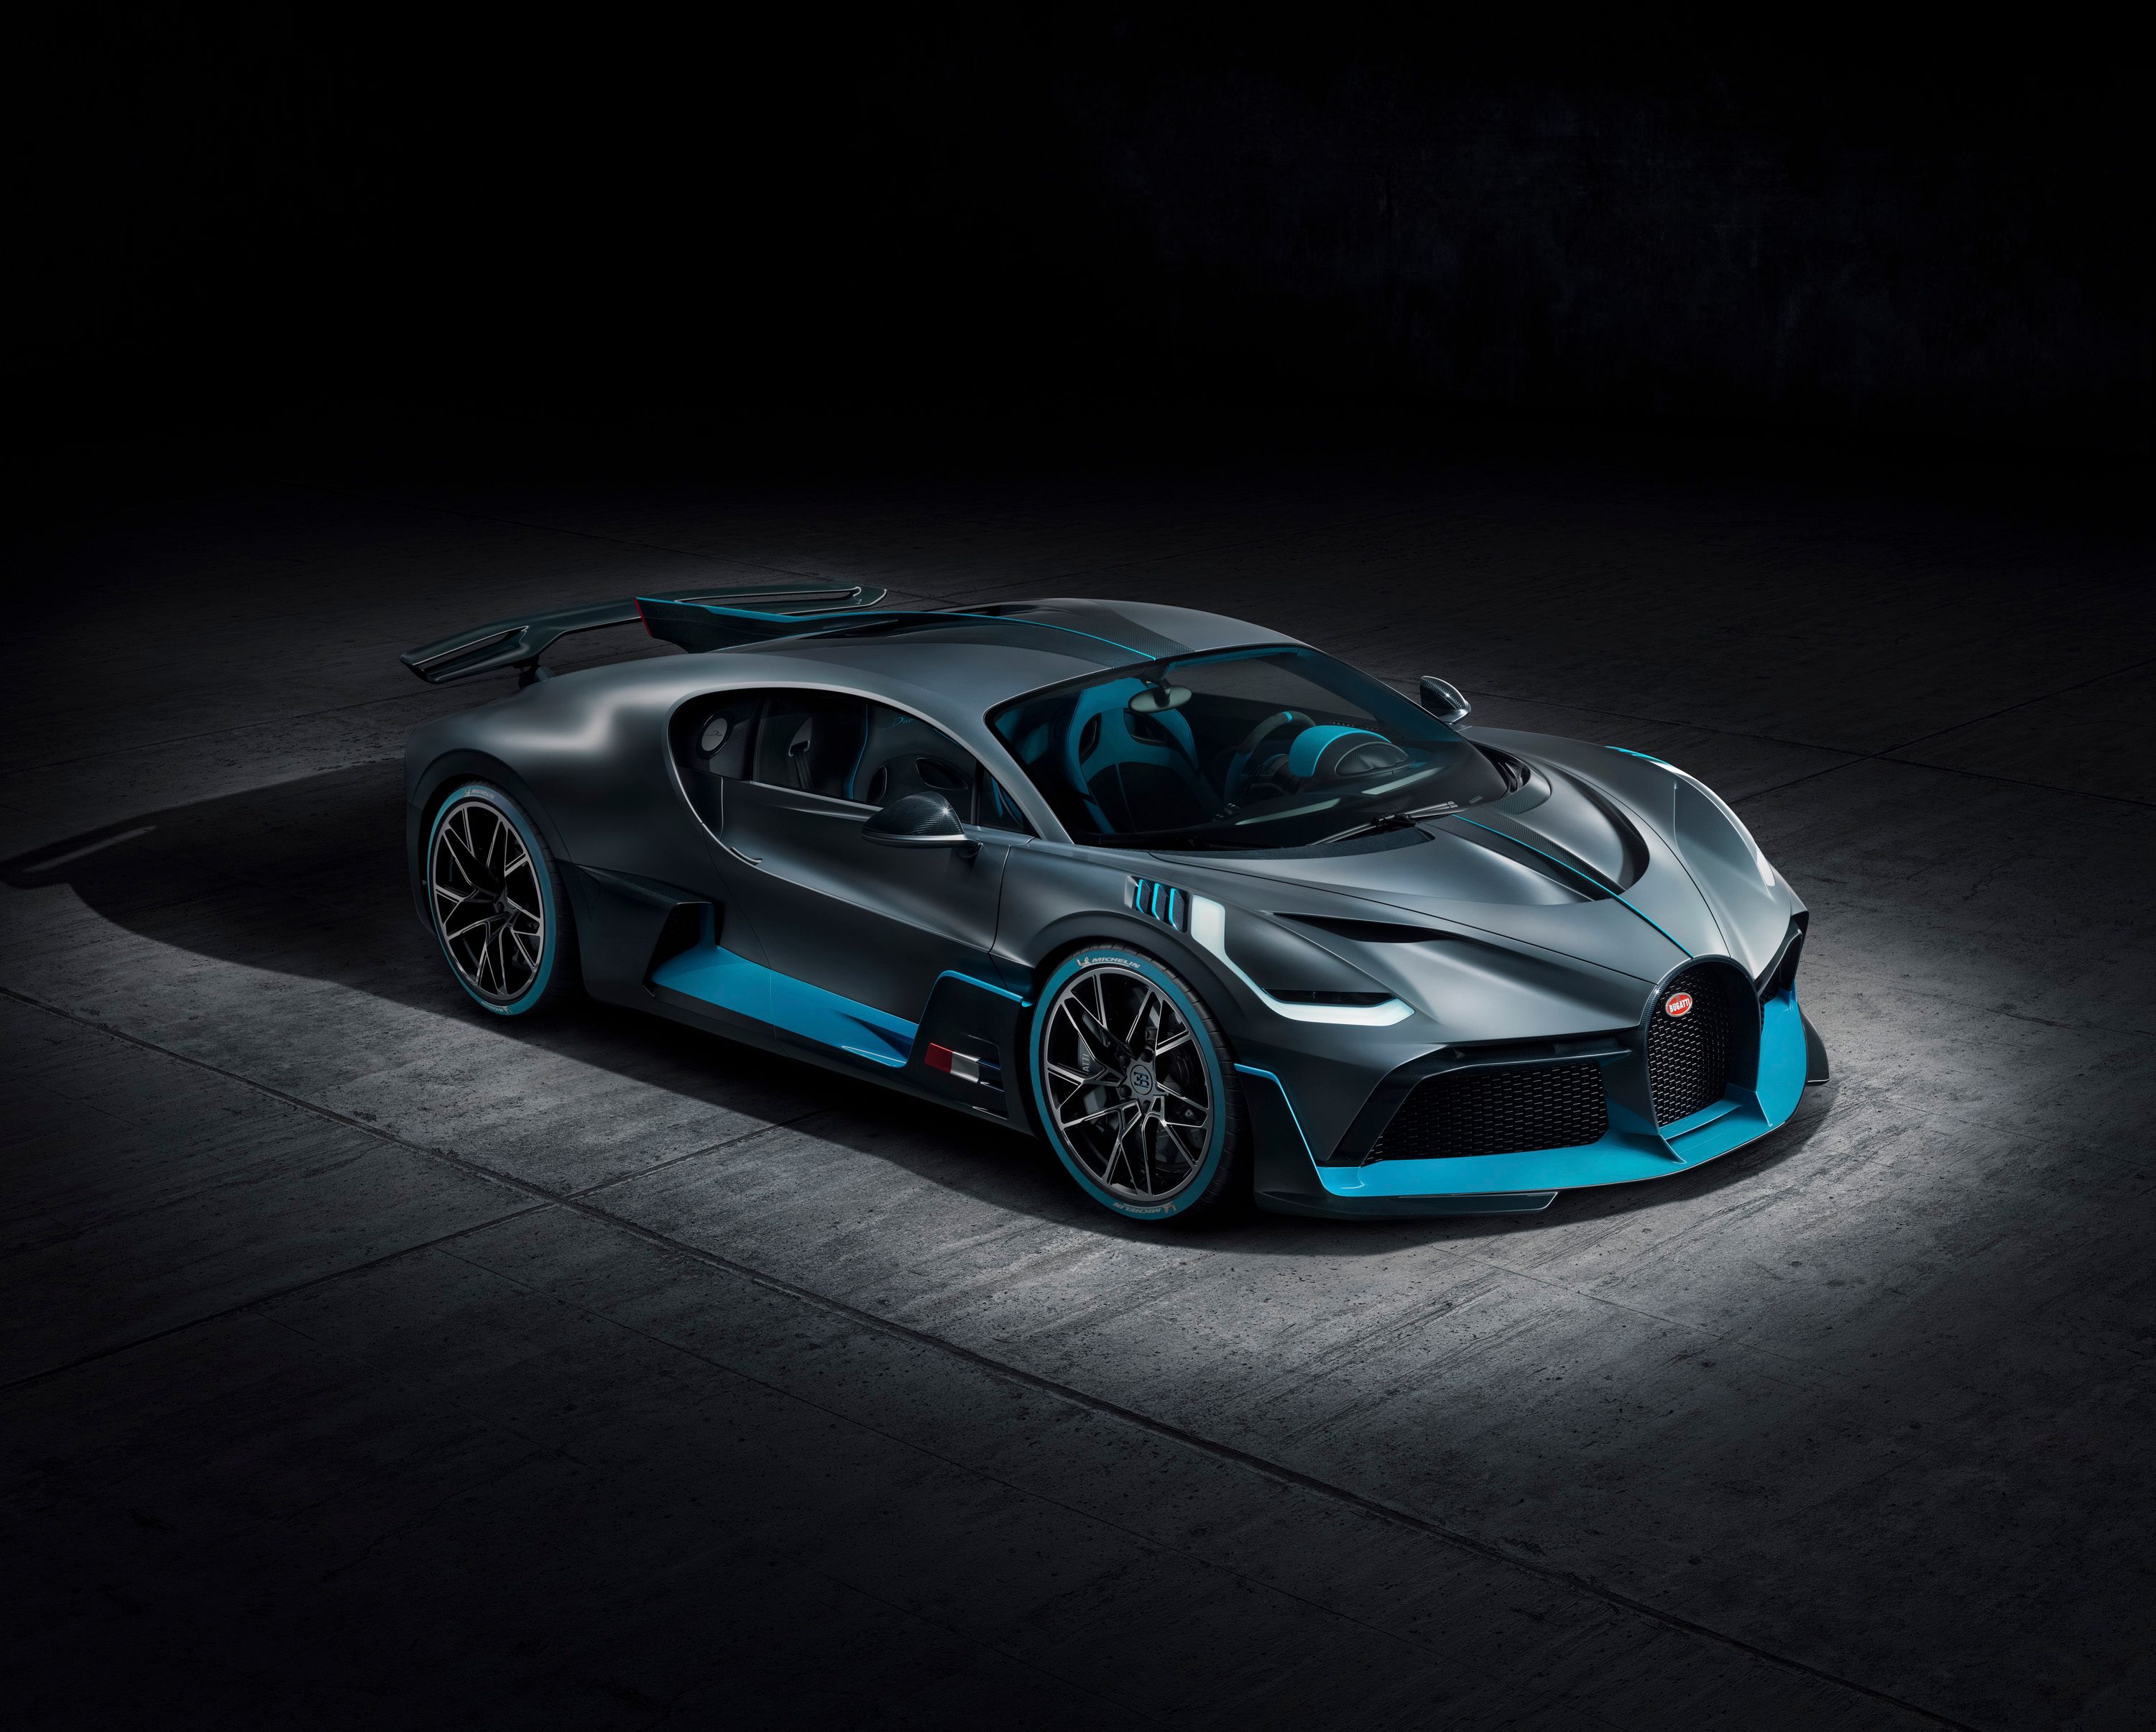 2020 The Bugatti Chiron Opens the Door For Even More New Cars in 2020